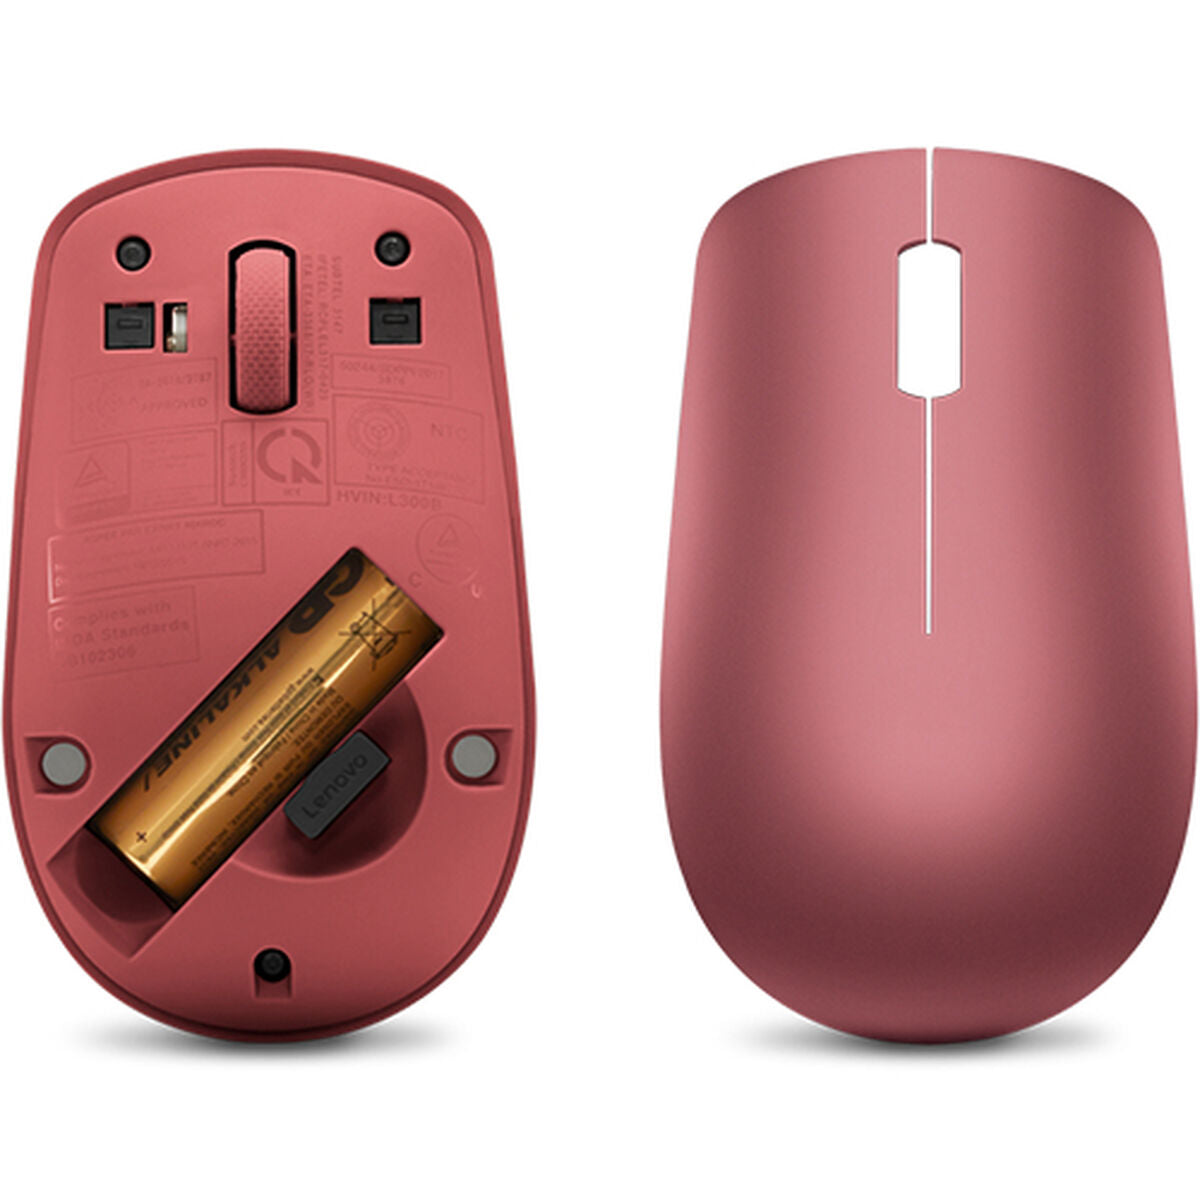 Wireless Mouse Lenovo GY50Z18990 Red, Lenovo, Computing, Accessories, wireless-mouse-lenovo-gy50z18990-red, Brand_Lenovo, category-reference-2609, category-reference-2642, category-reference-2656, category-reference-t-19685, category-reference-t-19908, category-reference-t-21353, computers / peripherals, Condition_NEW, office, Price_20 - 50, Teleworking, RiotNook